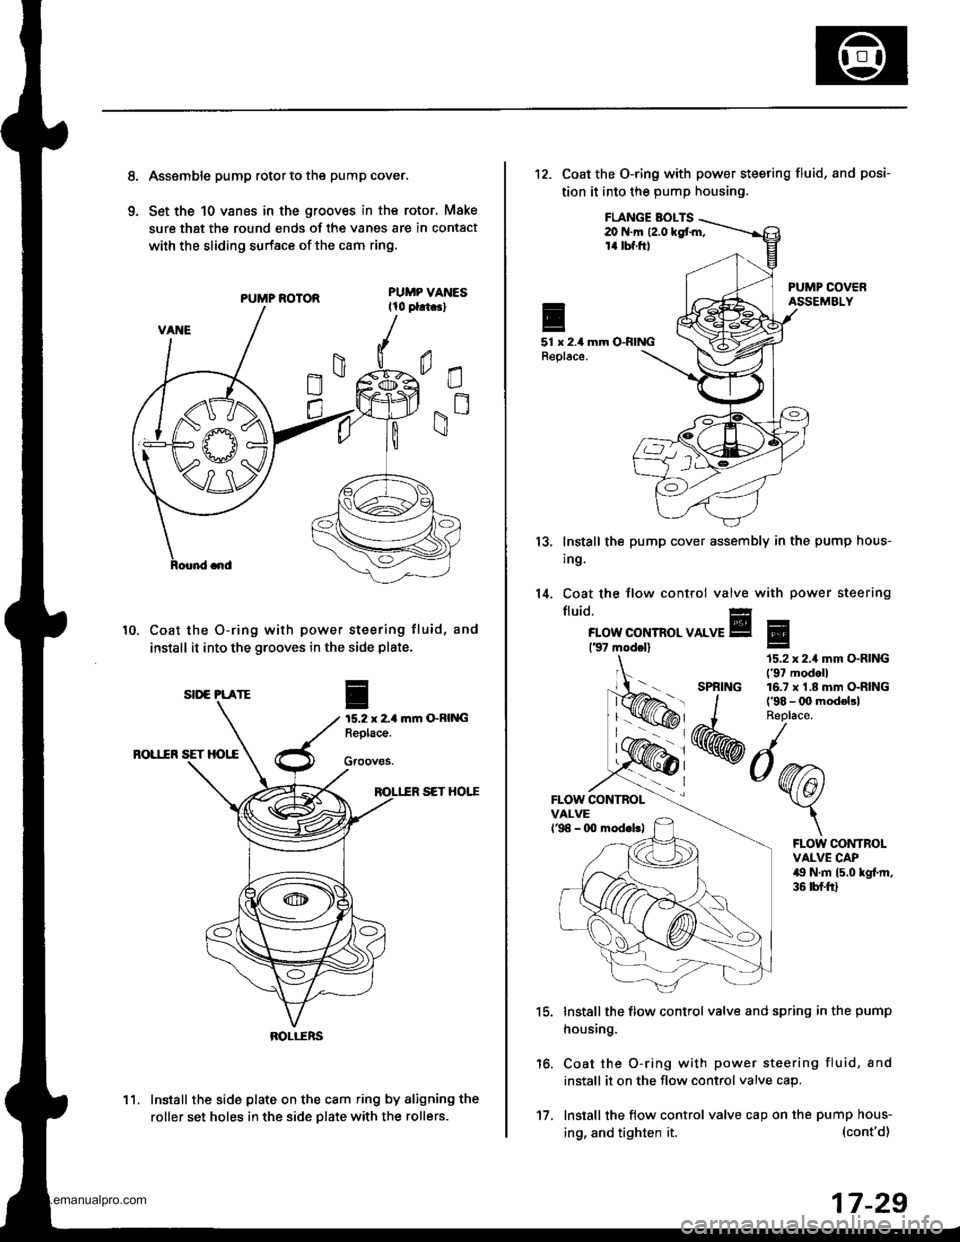 HONDA CR-V 1999 RD1-RD3 / 1.G Workshop Manual 
8.
9.
Asssmble pump rotor to the pump cover,
Set the 10 vanes in the grooves in the rotor, Make
sure that the round ends of the vanes are in contact
with the sliding surface of the cam ring.
PUMP ROT